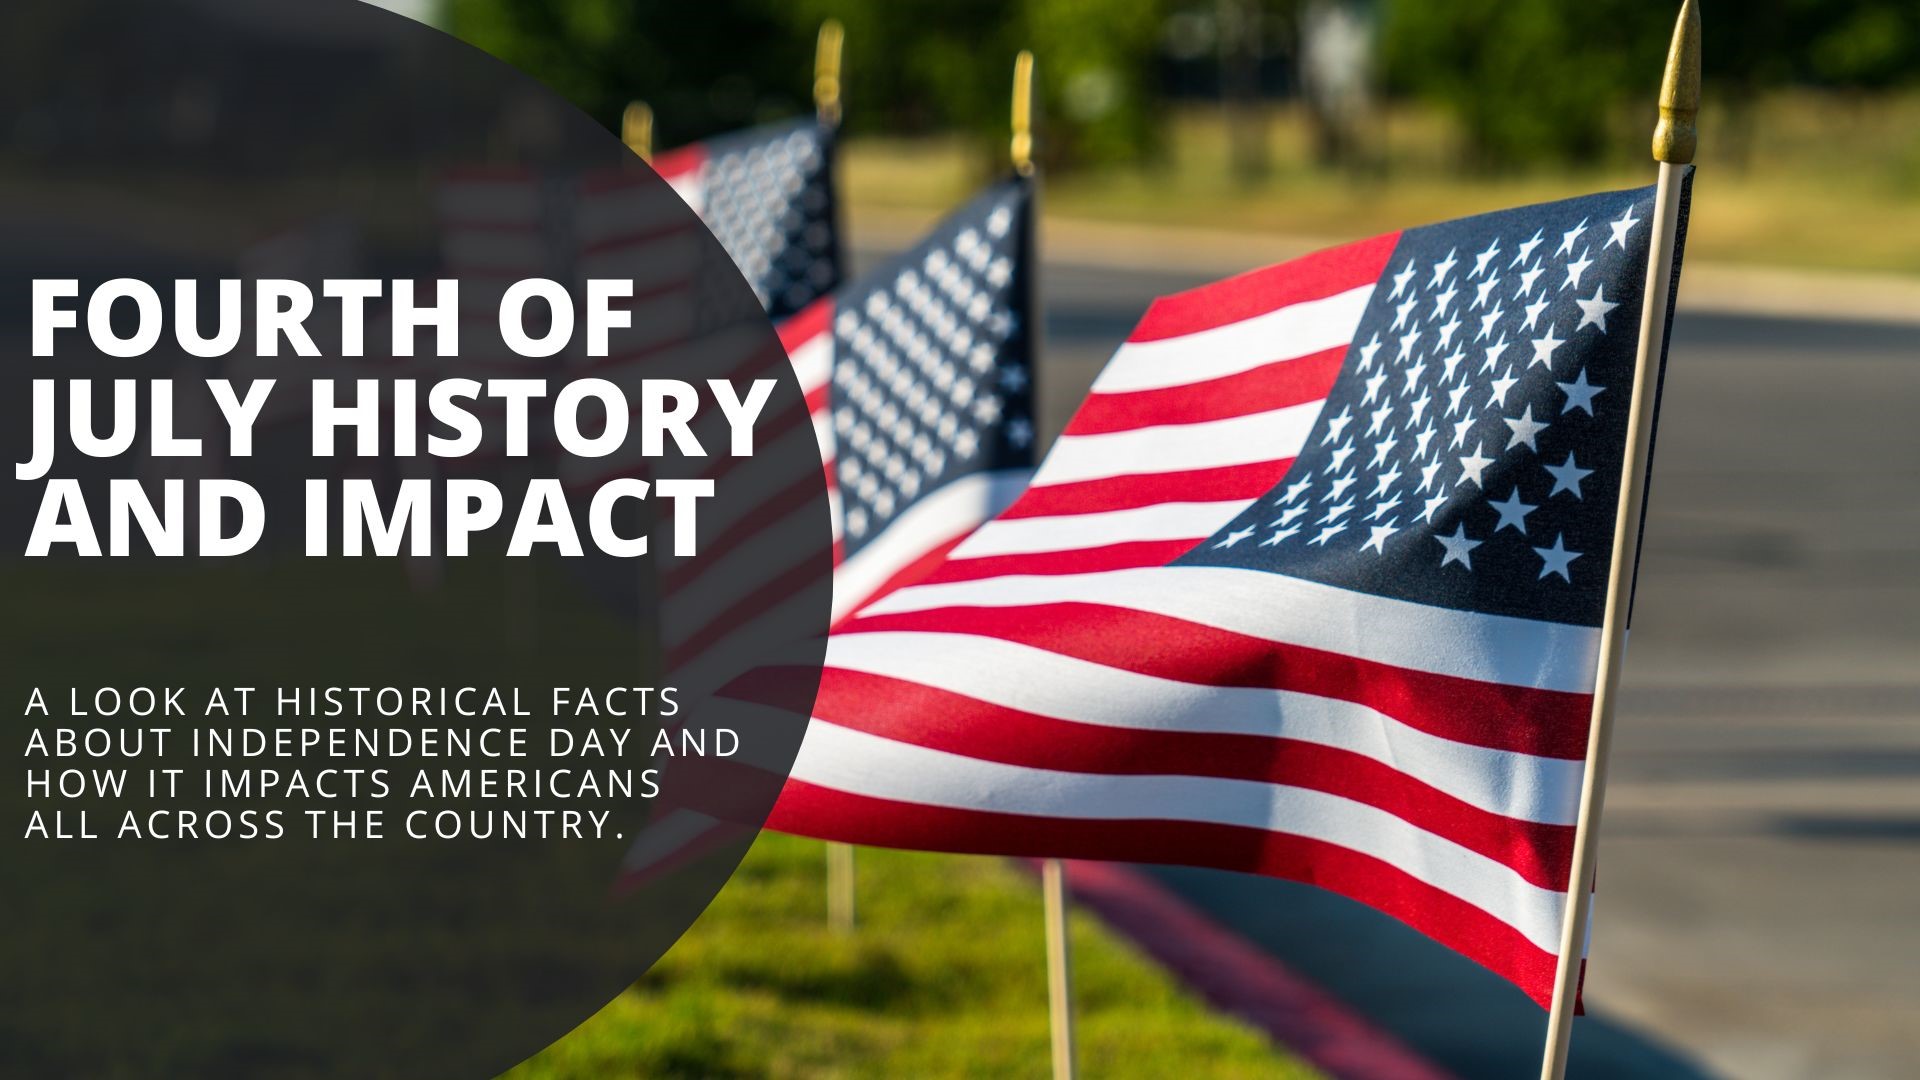 A look at historical facts about Independence Day and how it impacts Americans all across the country.